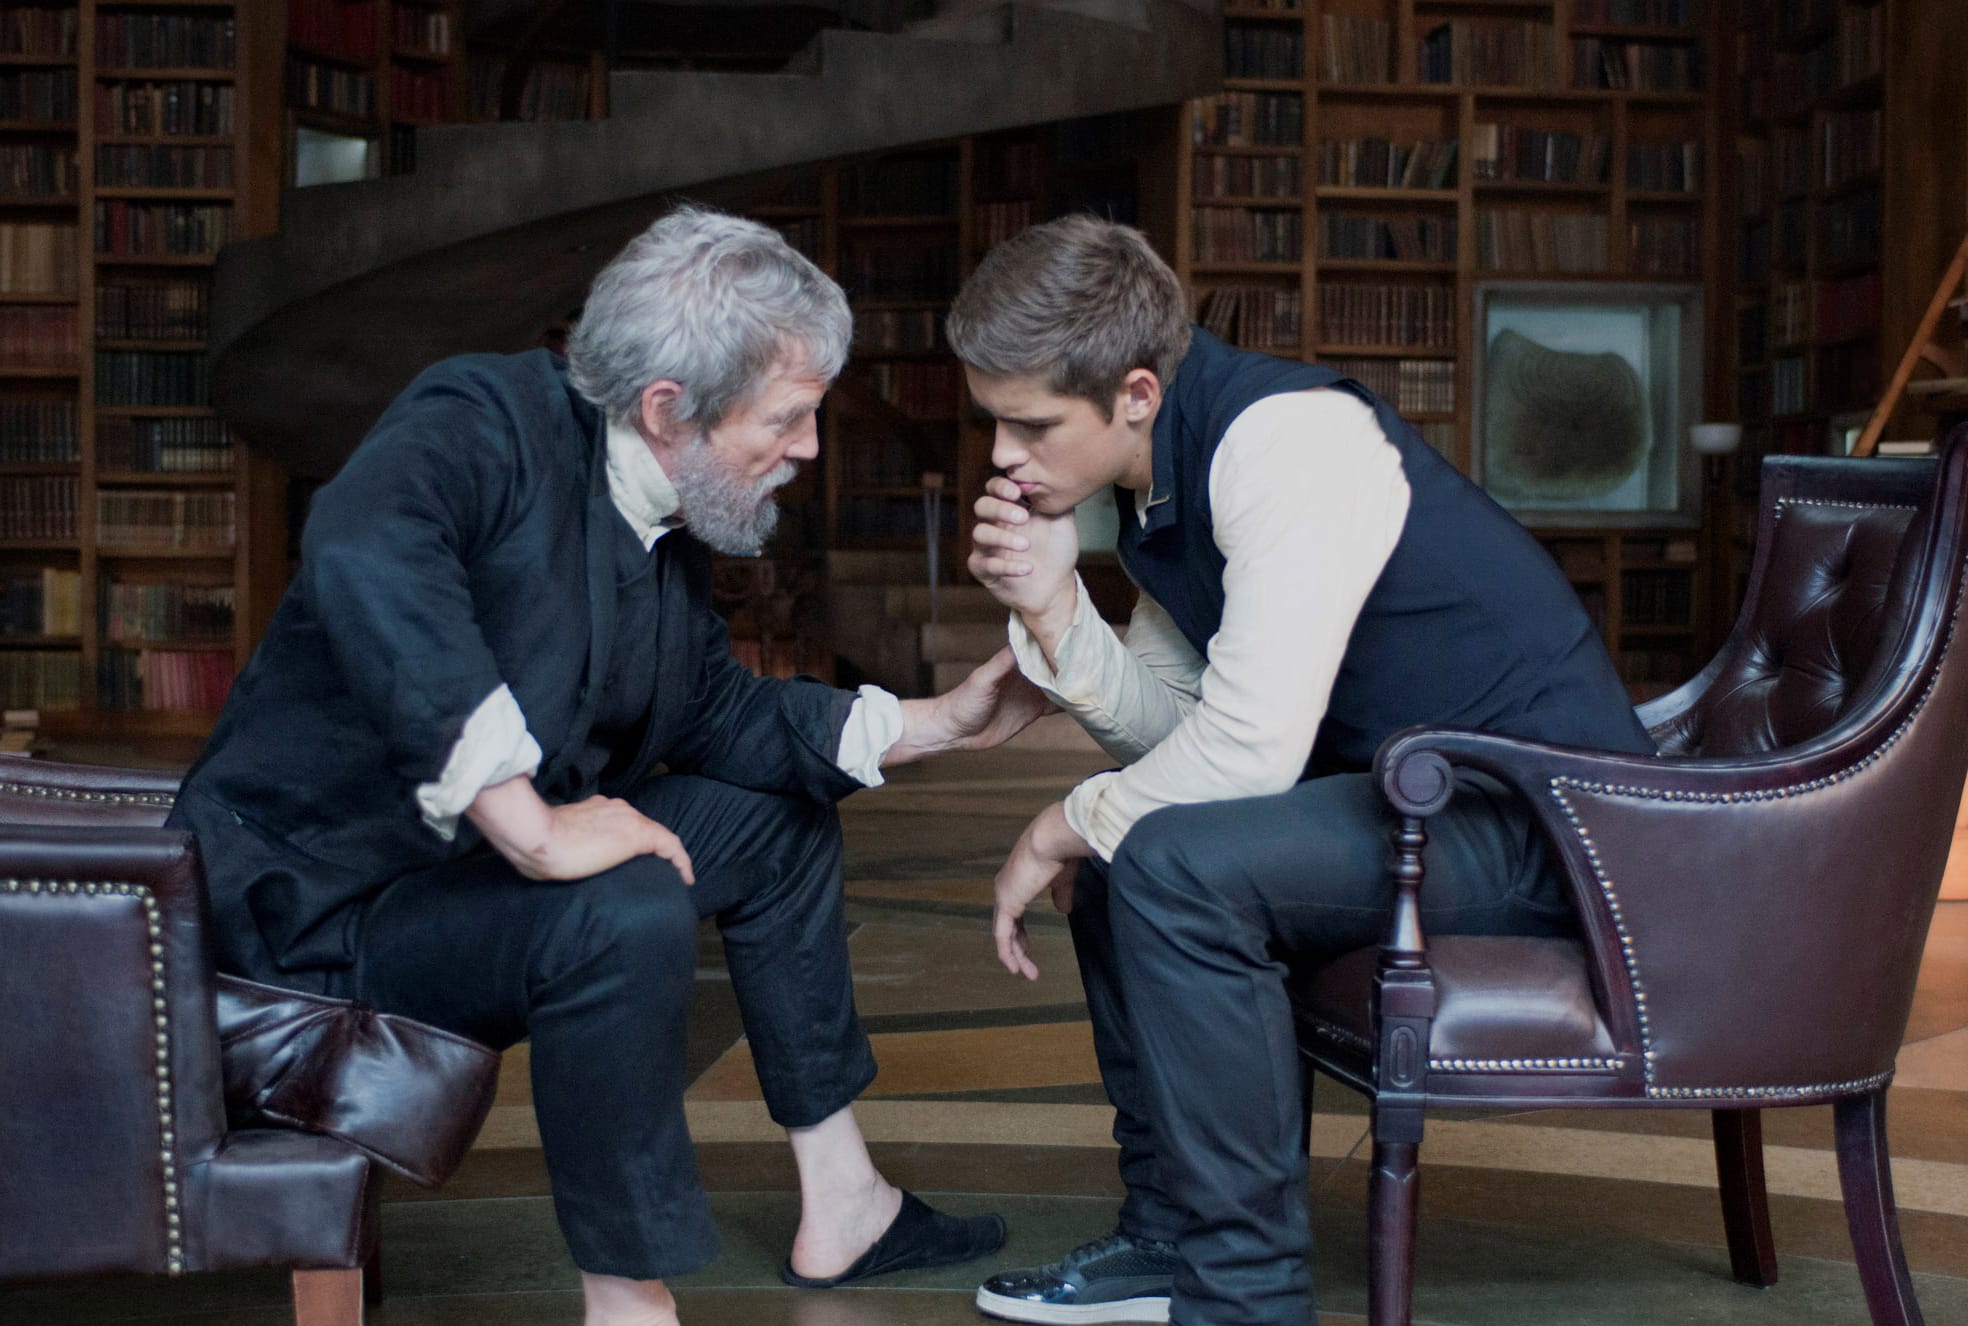 Jeff Bridges, left, and Brenton Thwaites appear in a scene from &quot;The Giver.&quot;